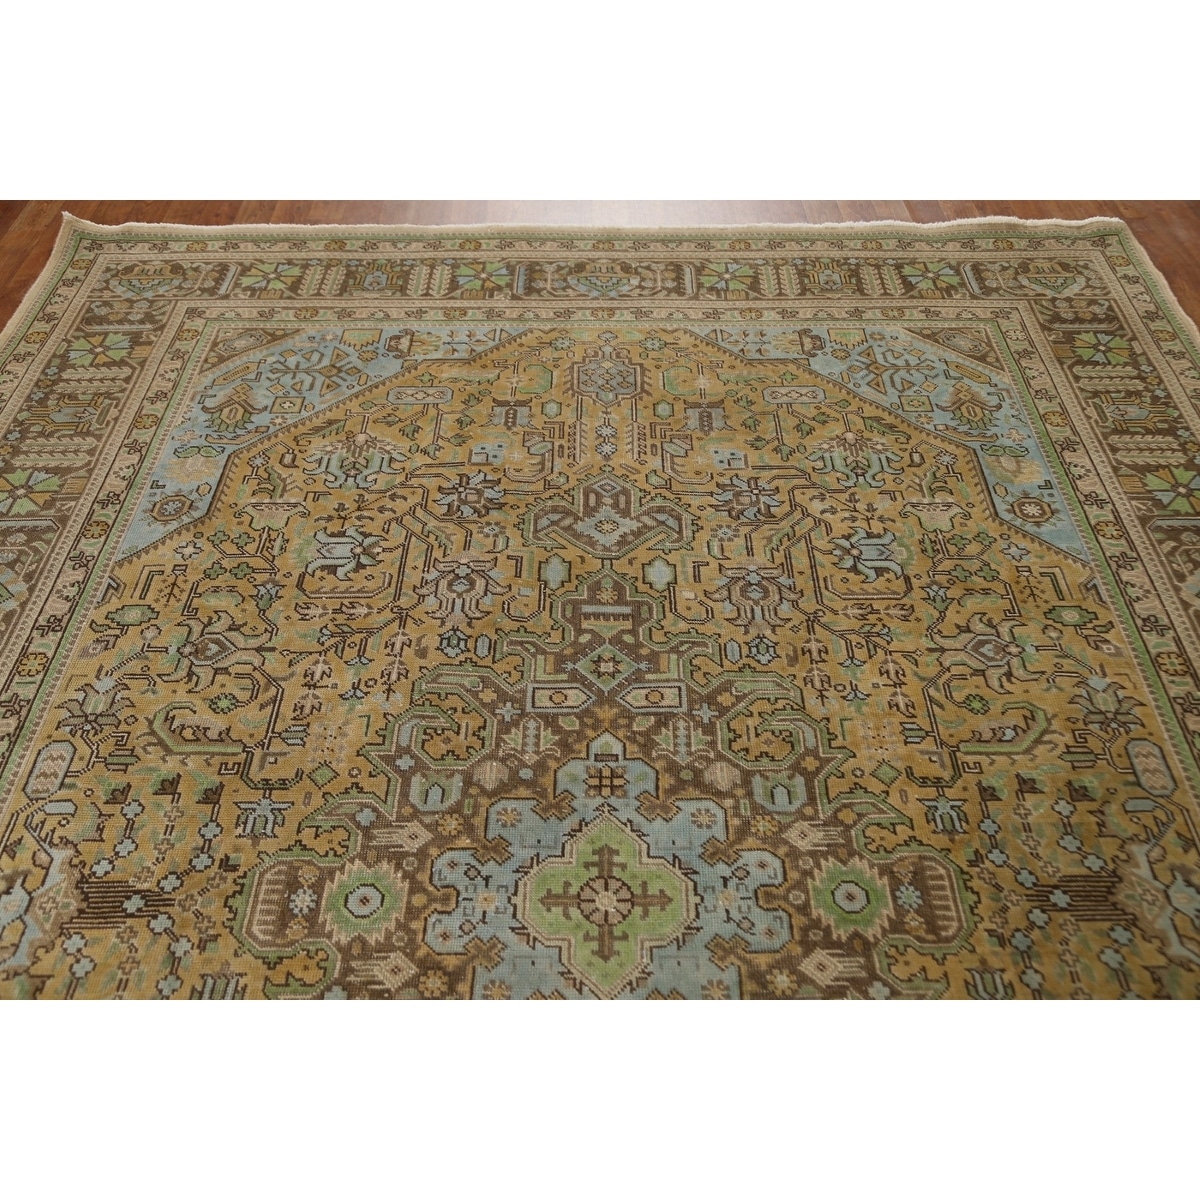 Vintage Over-Dyed Tabriz Persian Area Rug Hand-Knotted Wool Carpet - 7'10 x 10'10 - Gold/ Brown/ Light Blue